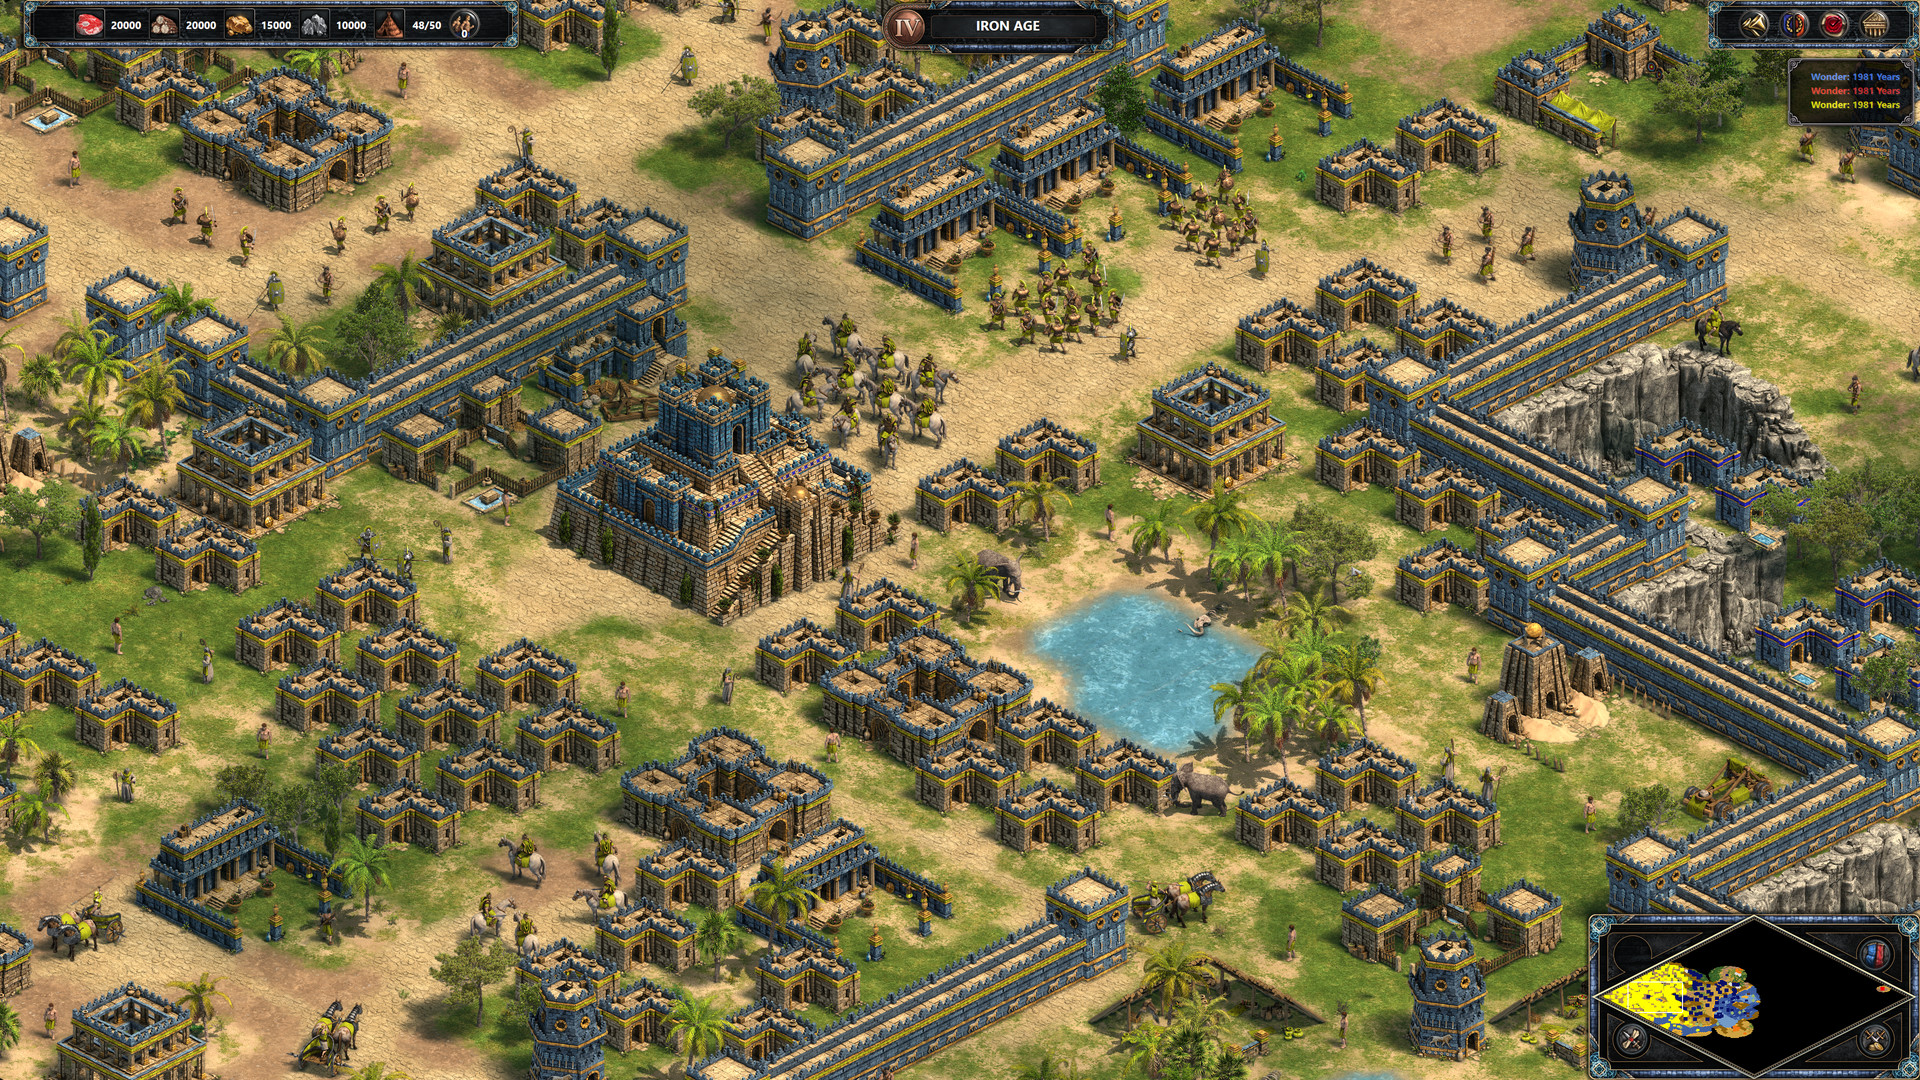 Save 75% on Age of Empires: Definitive Edition on Steam